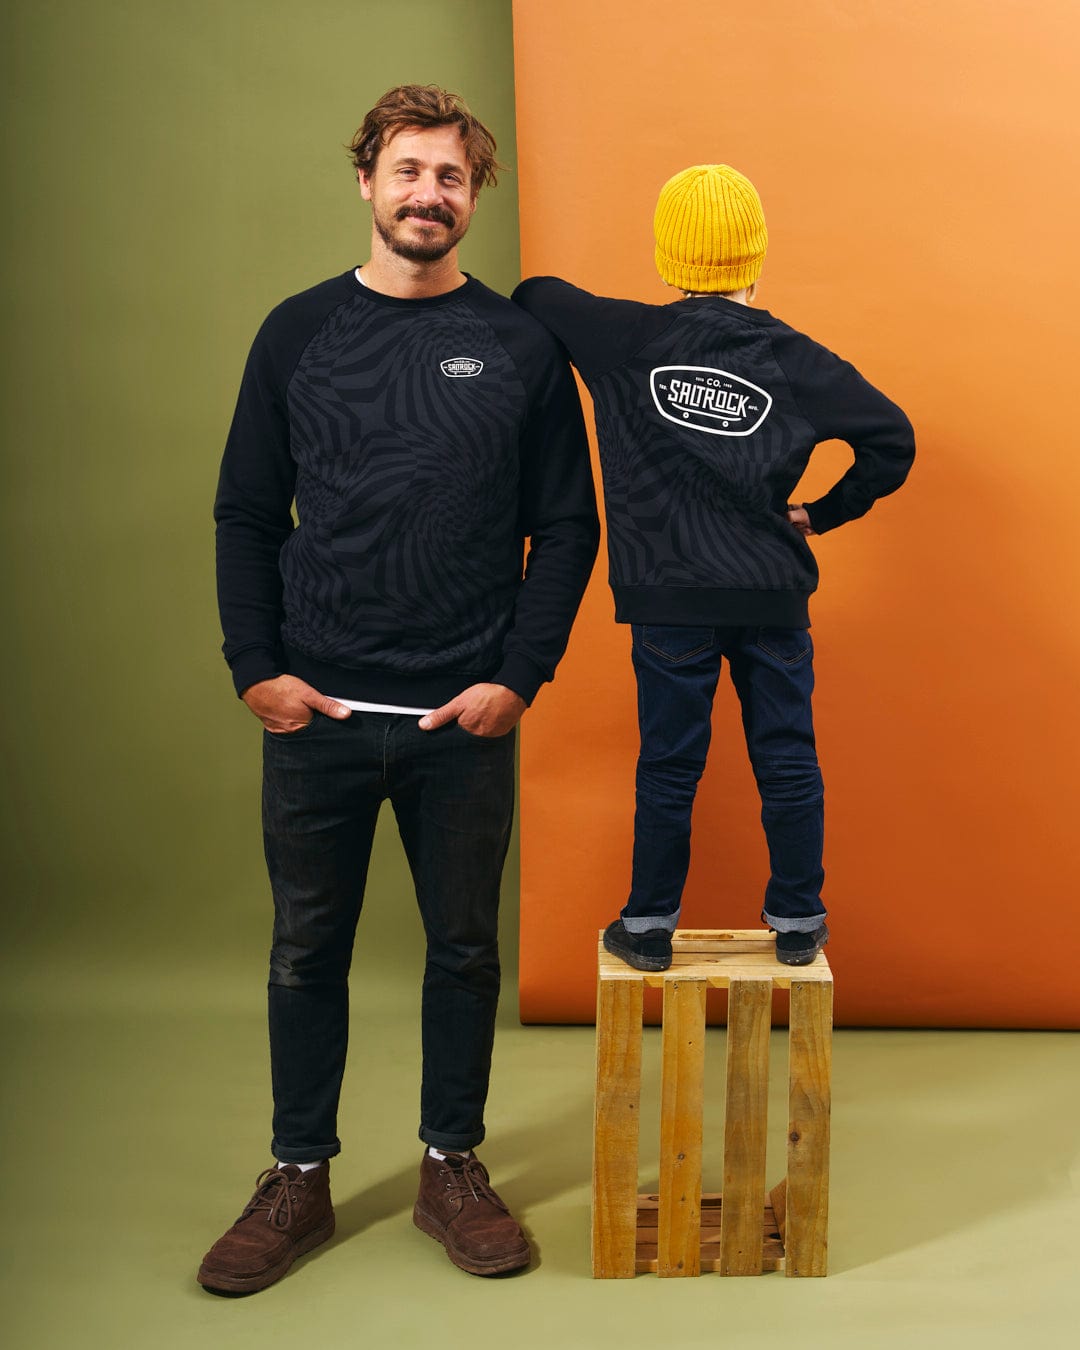 A man and a child standing next to each other in a Grip It - Kids Crew Neck Sweat - Black featuring Saltrock branding.